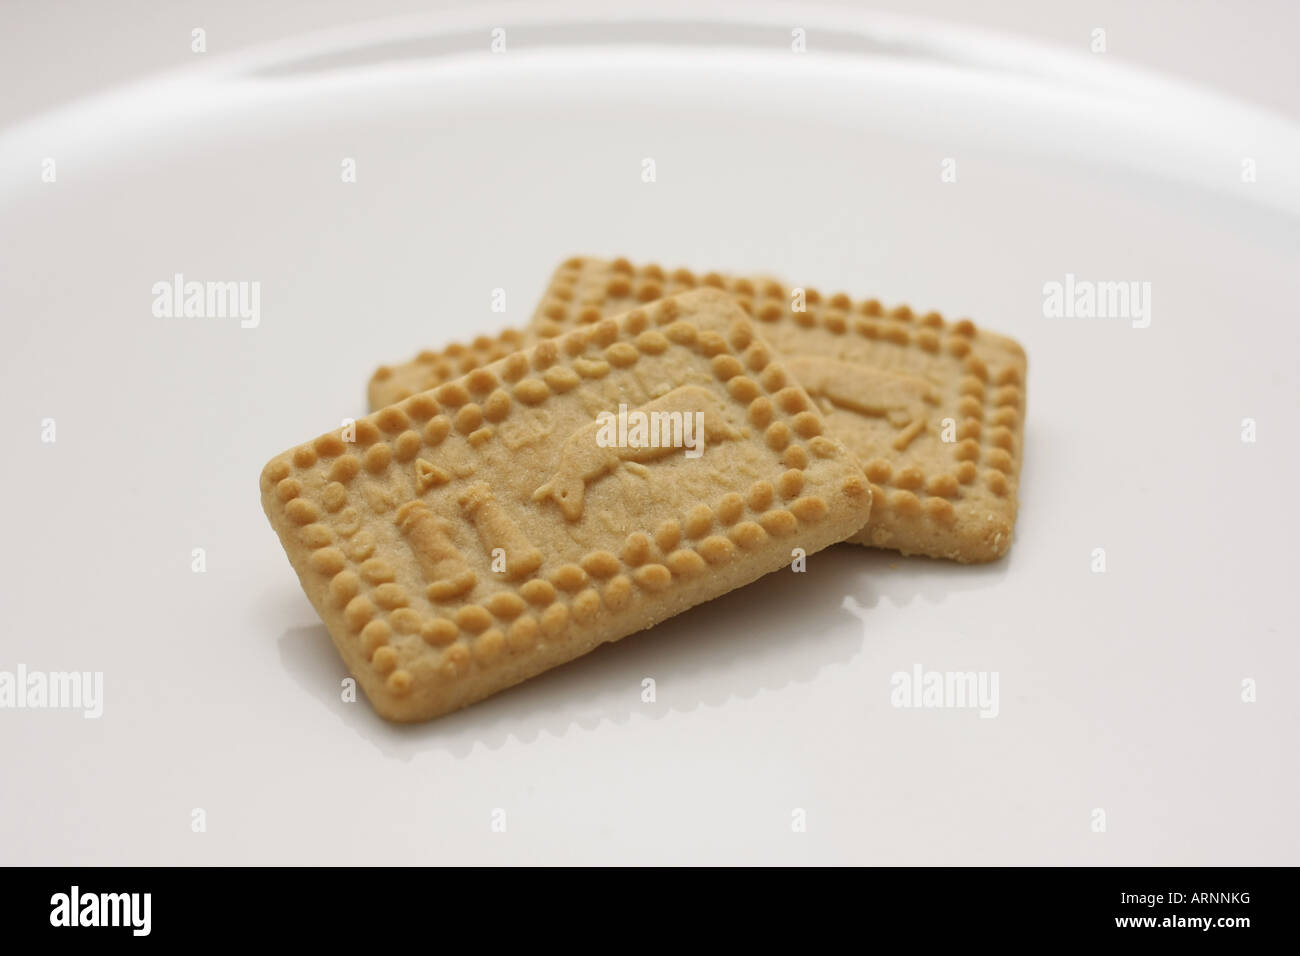 Three whole Malted Milk biscuits on a white plate Stock Photo